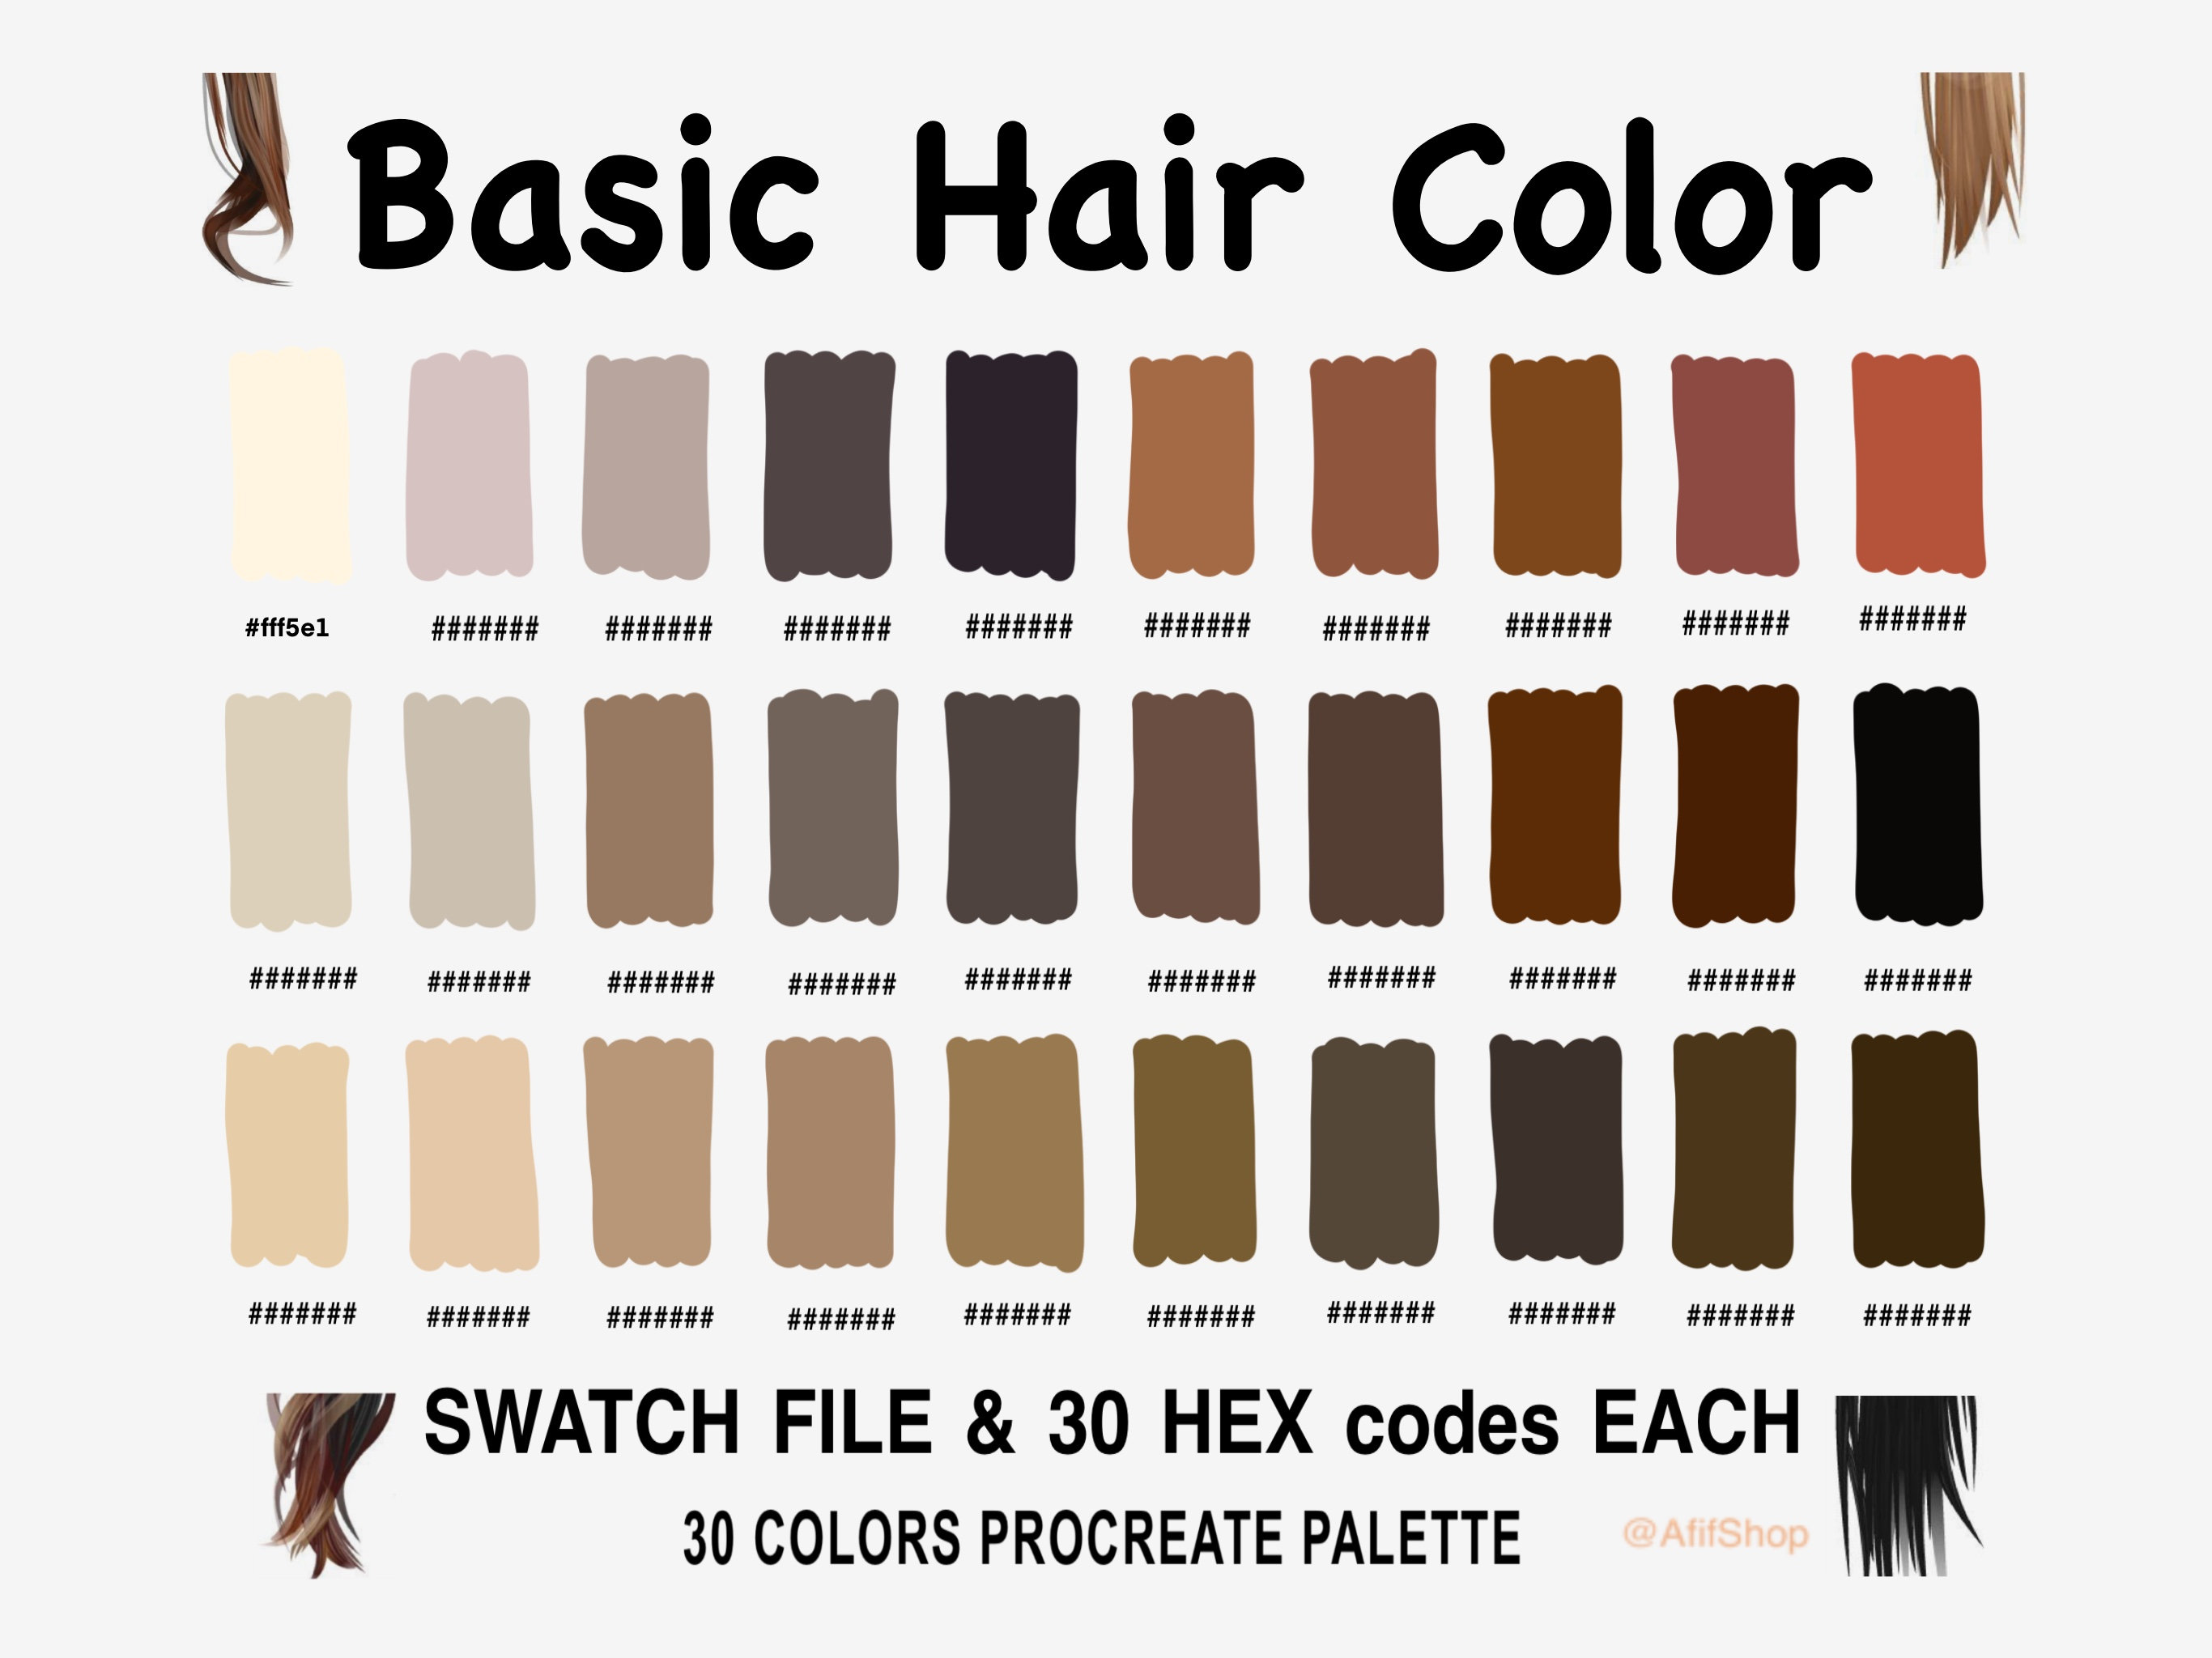 9. "Blonde Hair Color Studio" app for creating custom shades - wide 4